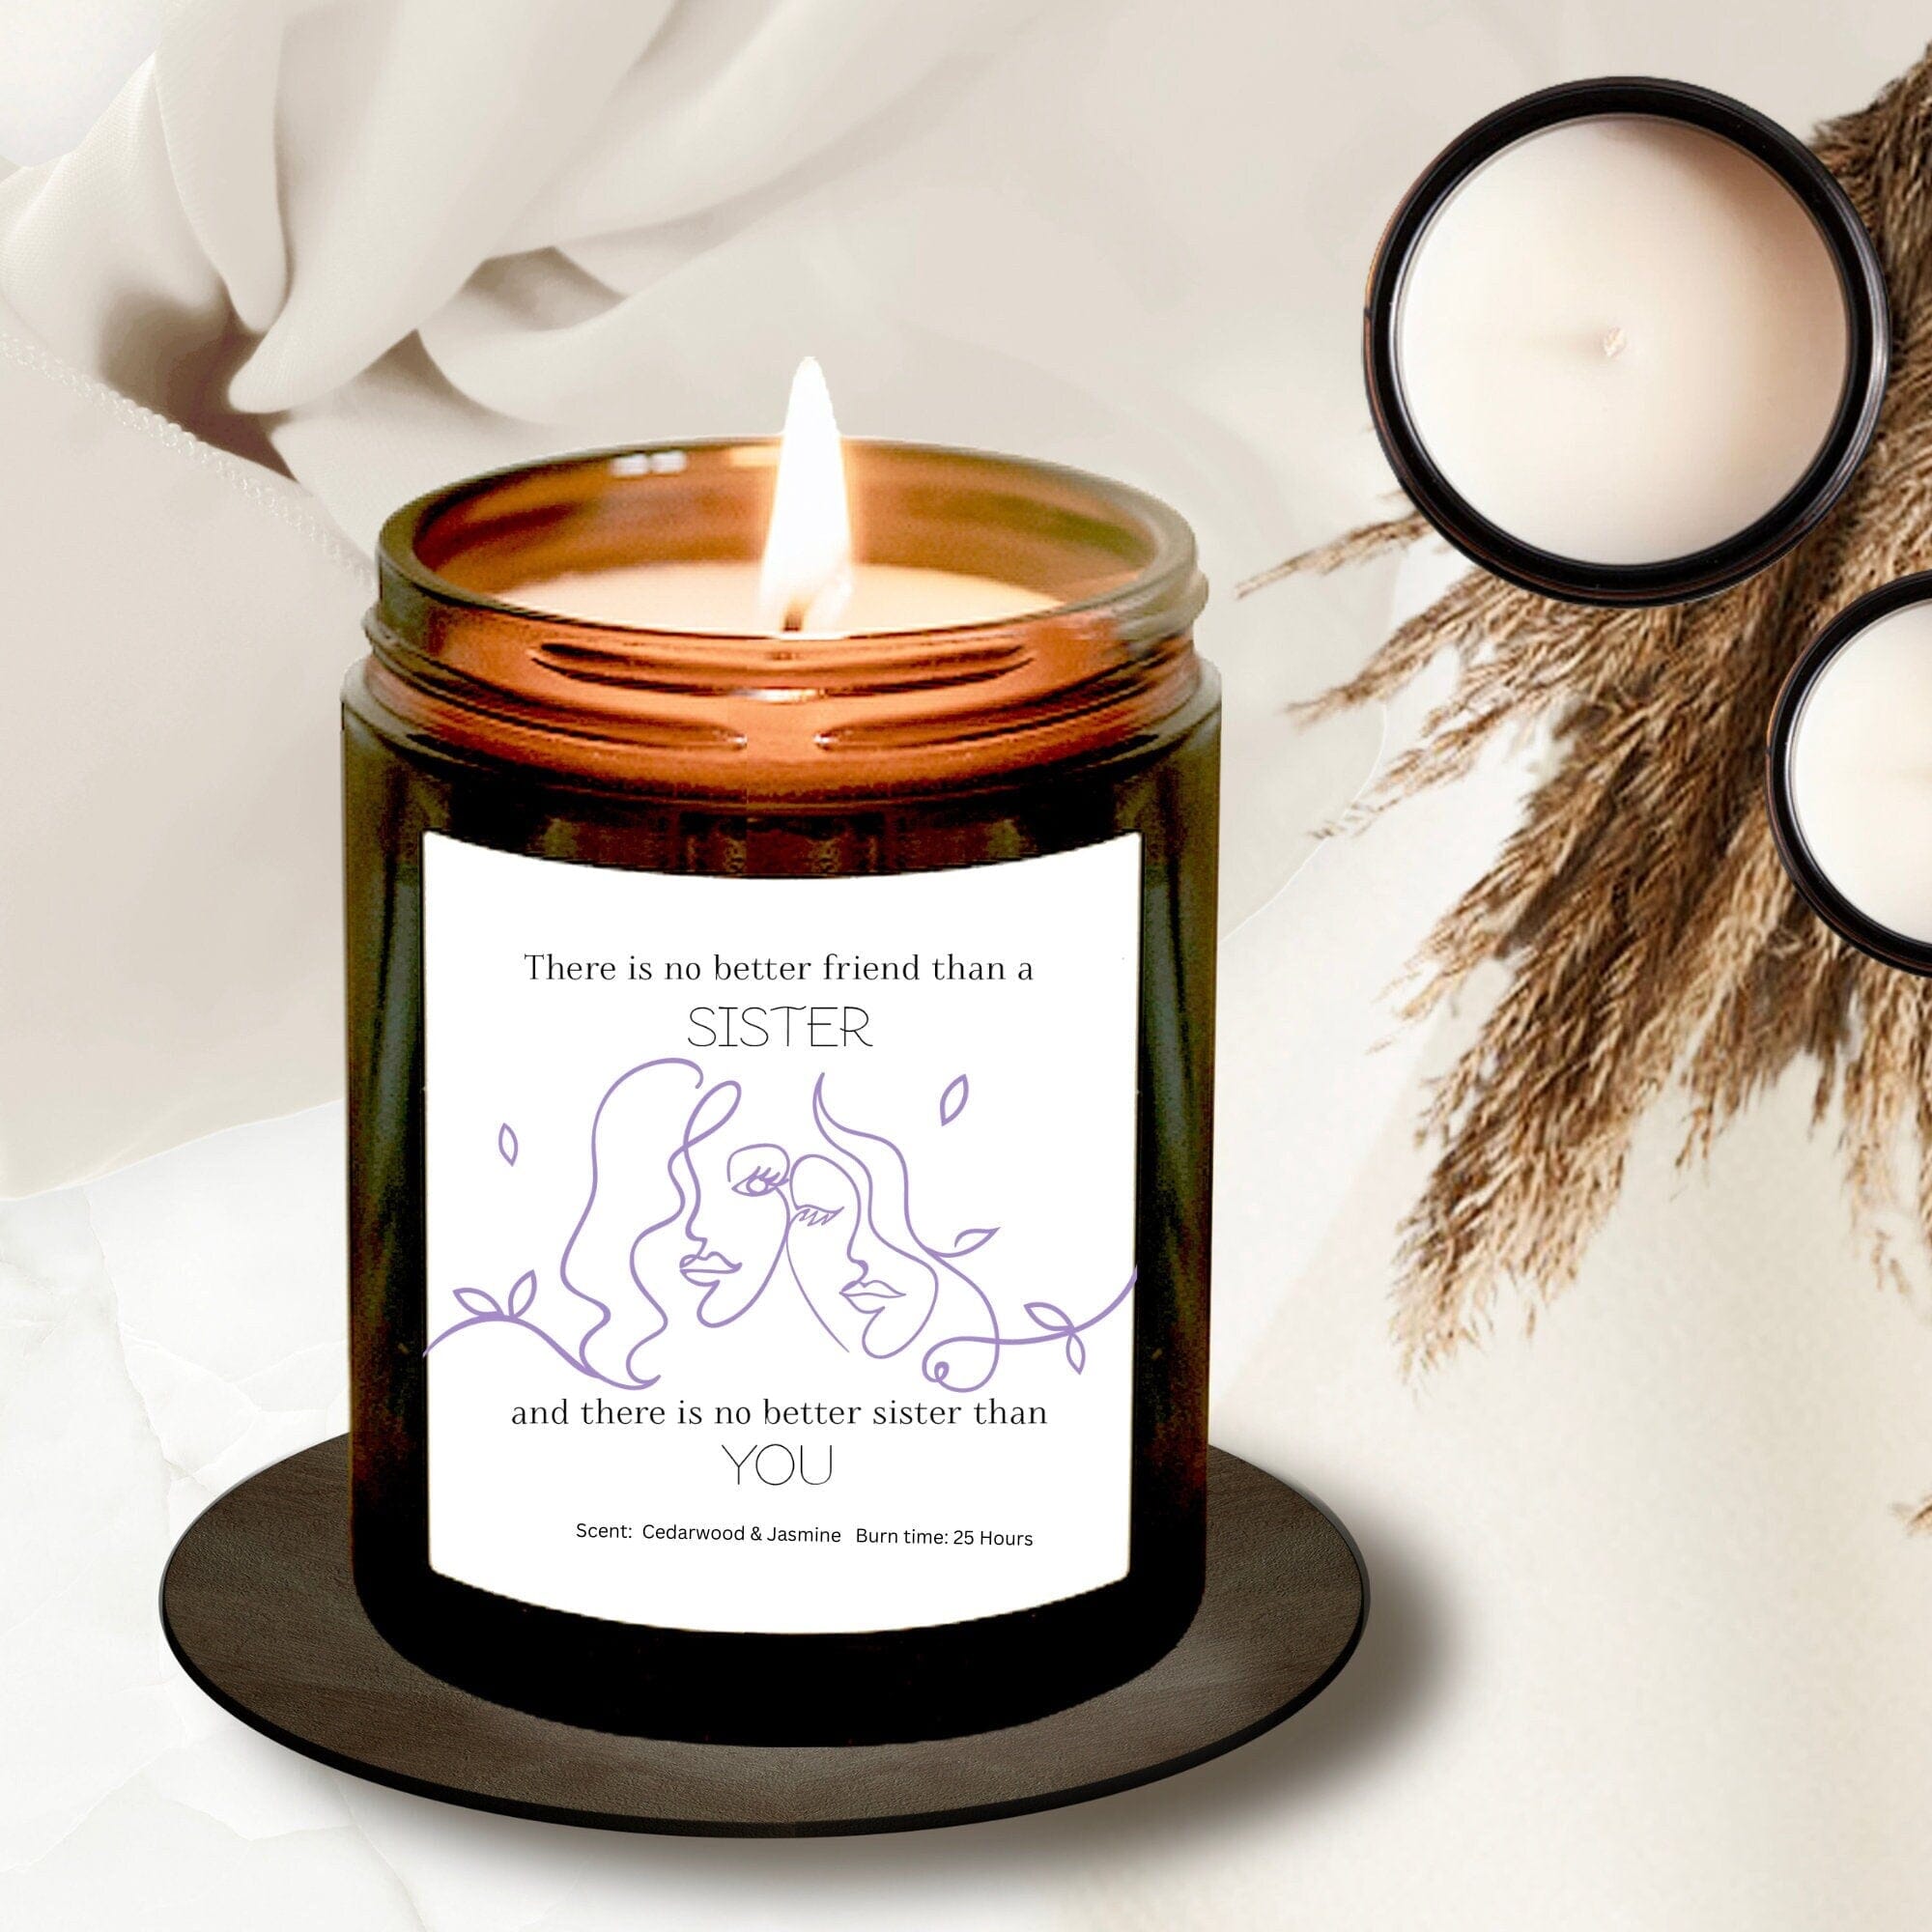 Candle for Sister, There Is No Better Friend Than a Sister, Hand-Poured Scented Candle, Gift for Sister